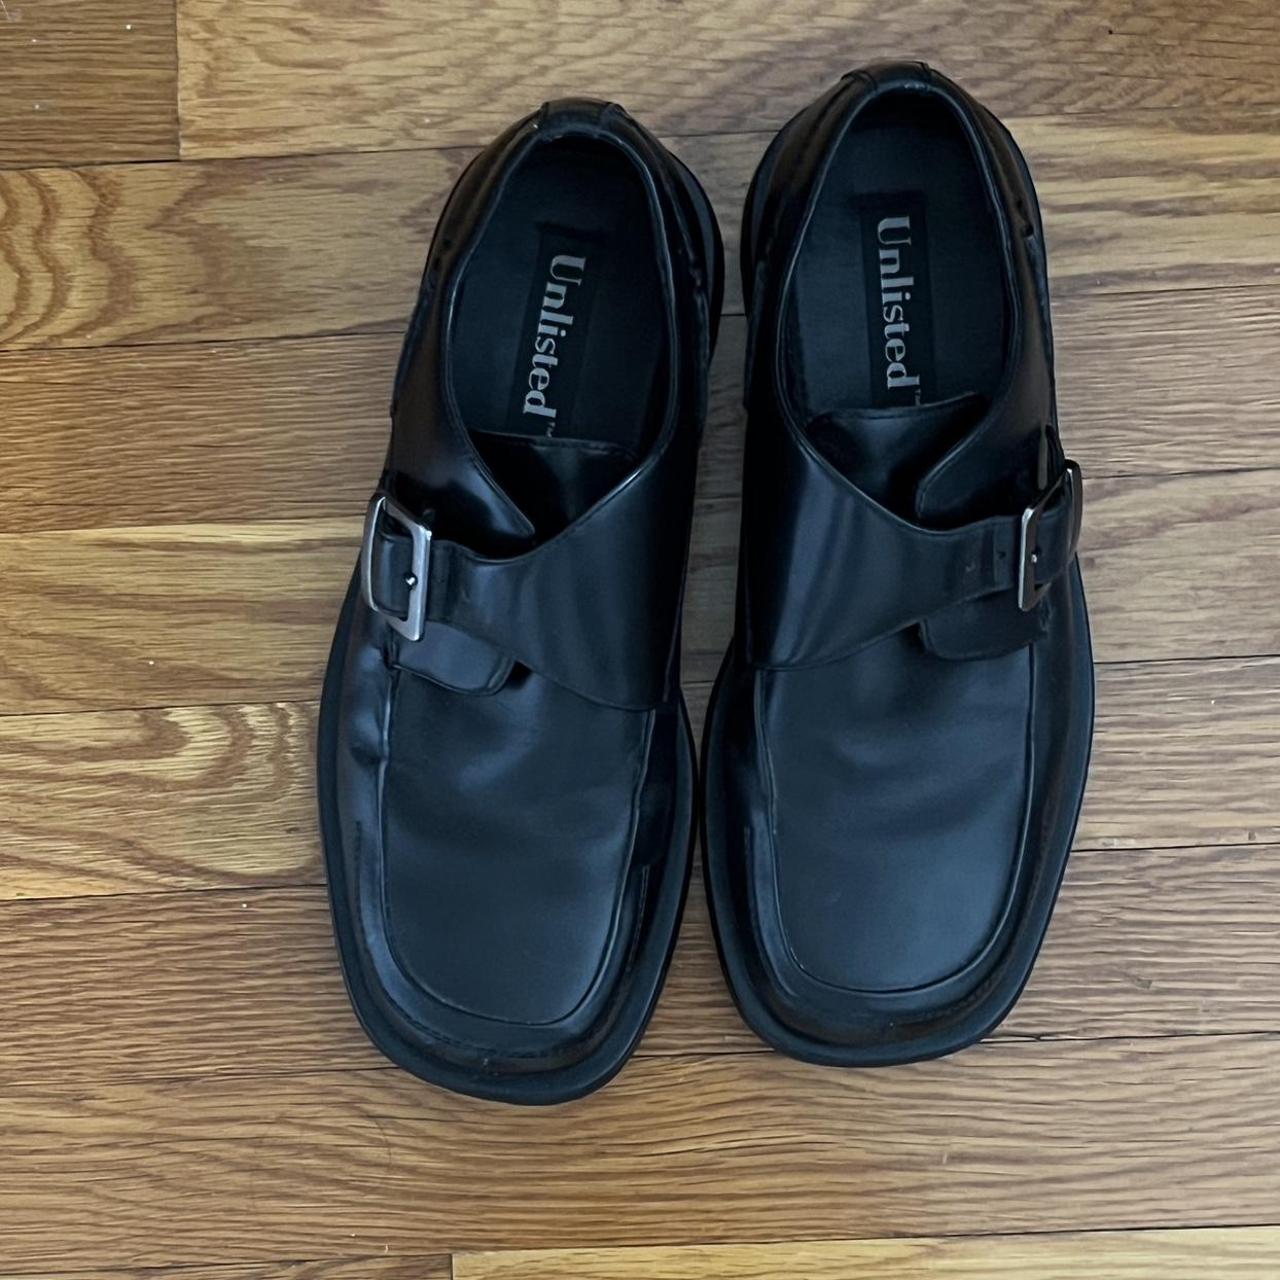 black faux leather Mary janes - Depop